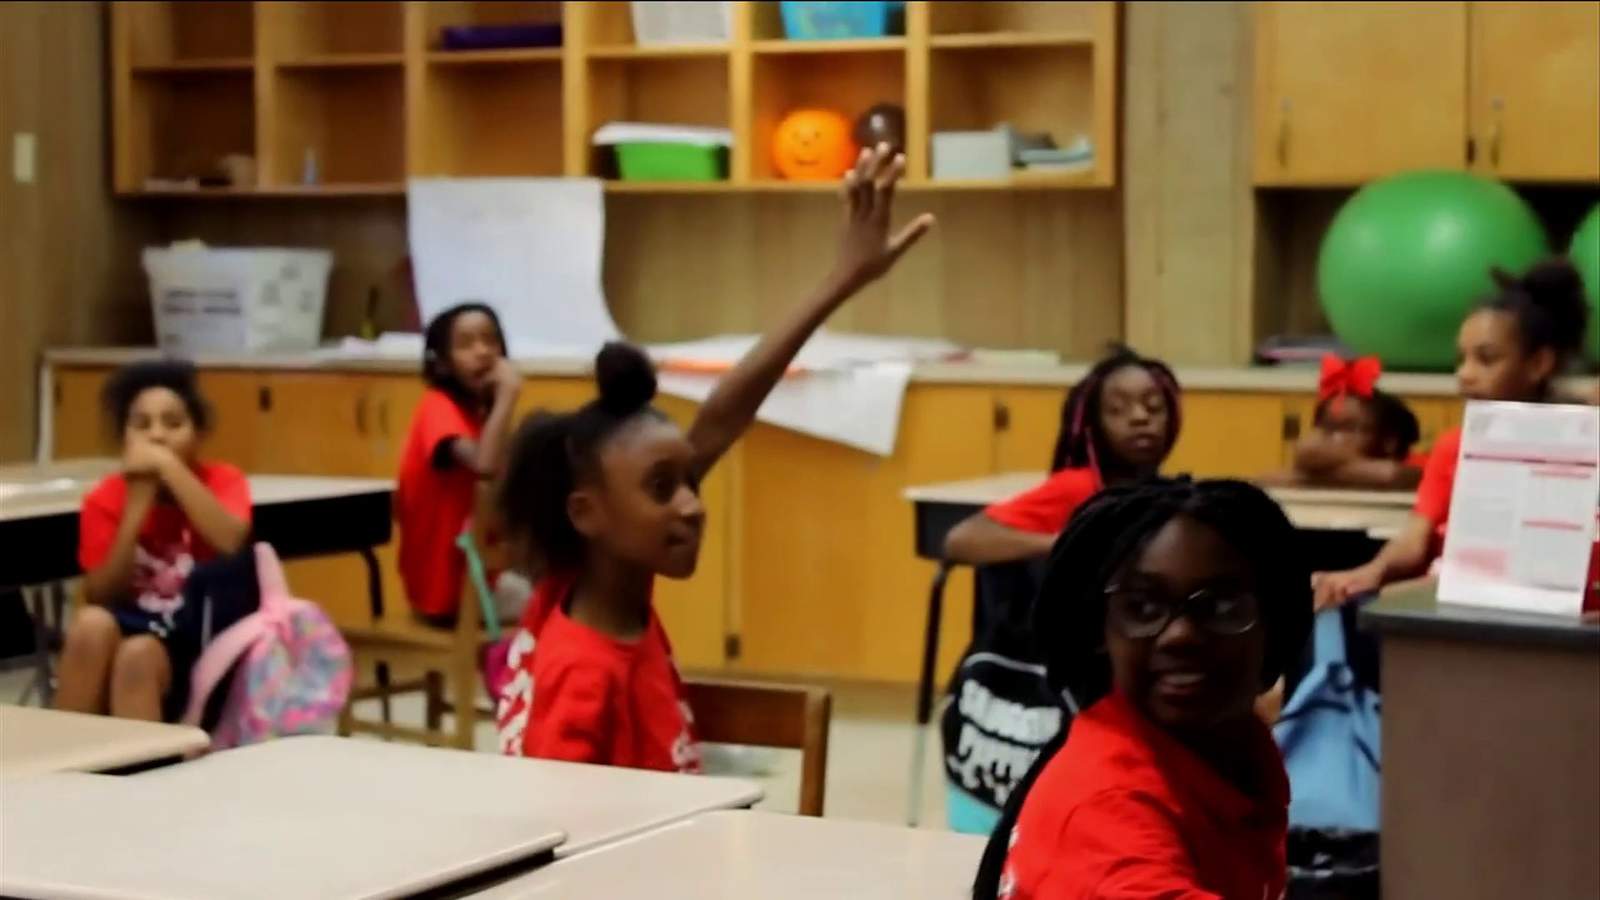 Girls Inc. has helped empower girls at one Duval County school for 50 years